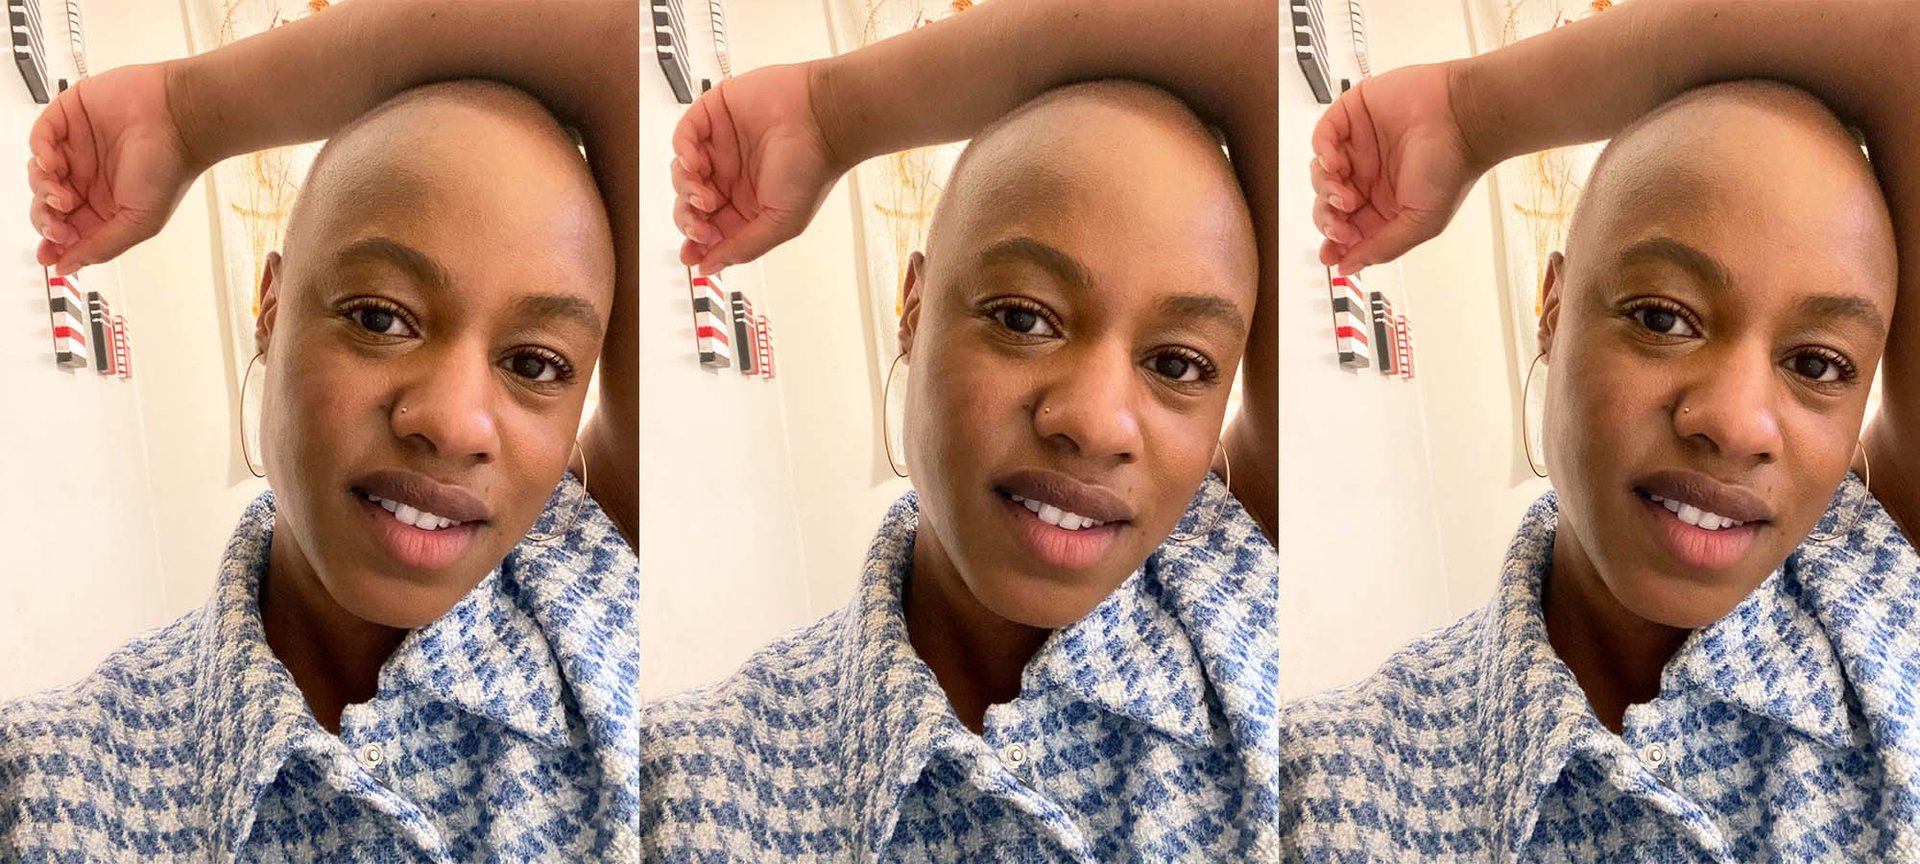 How To Care For Your Bald Head